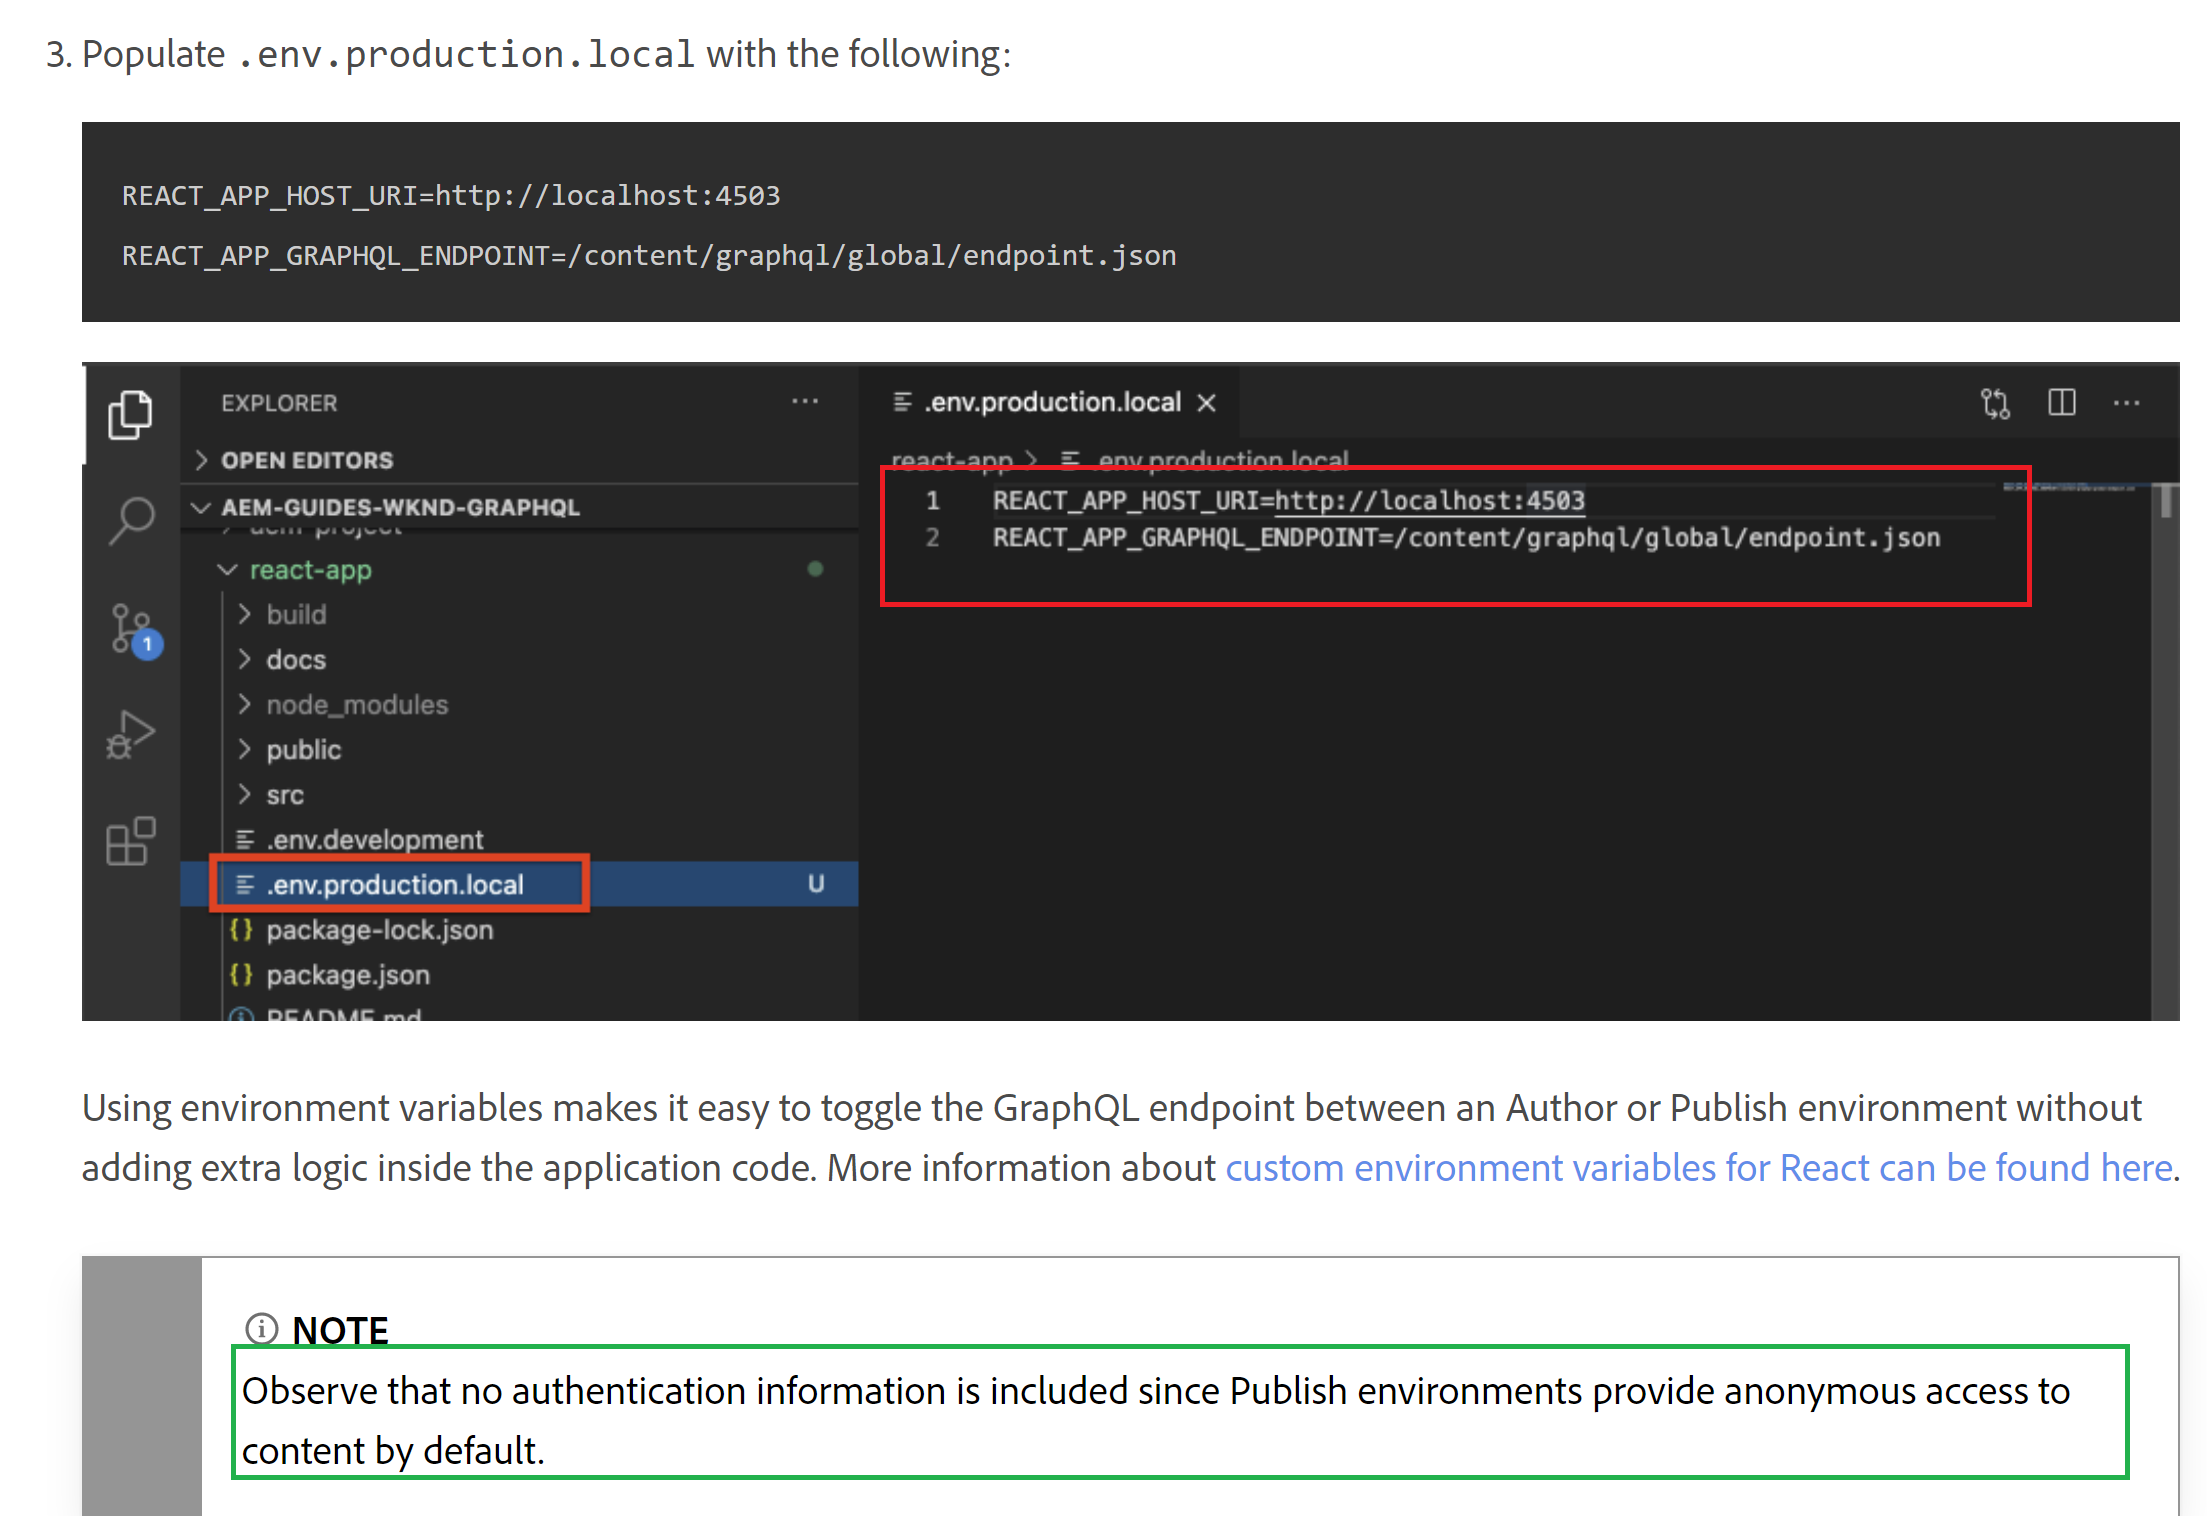 How to generate auth tokens to access local dev gr - Adobe Experience  League Community - 401706